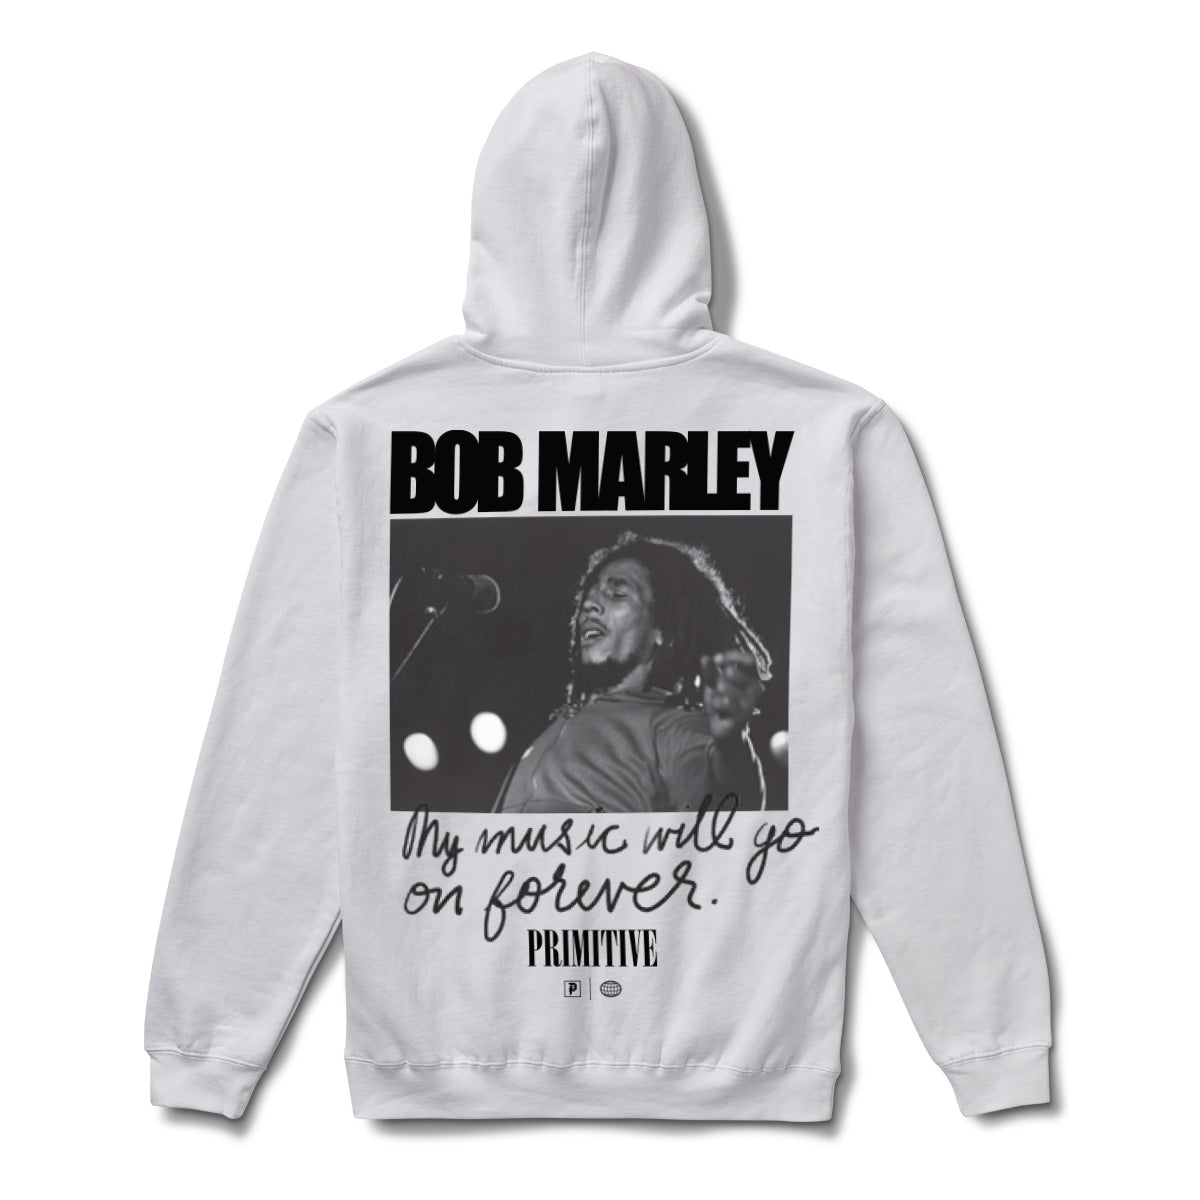 Primitive x Bob Marley Forever Hoodie - White image 1